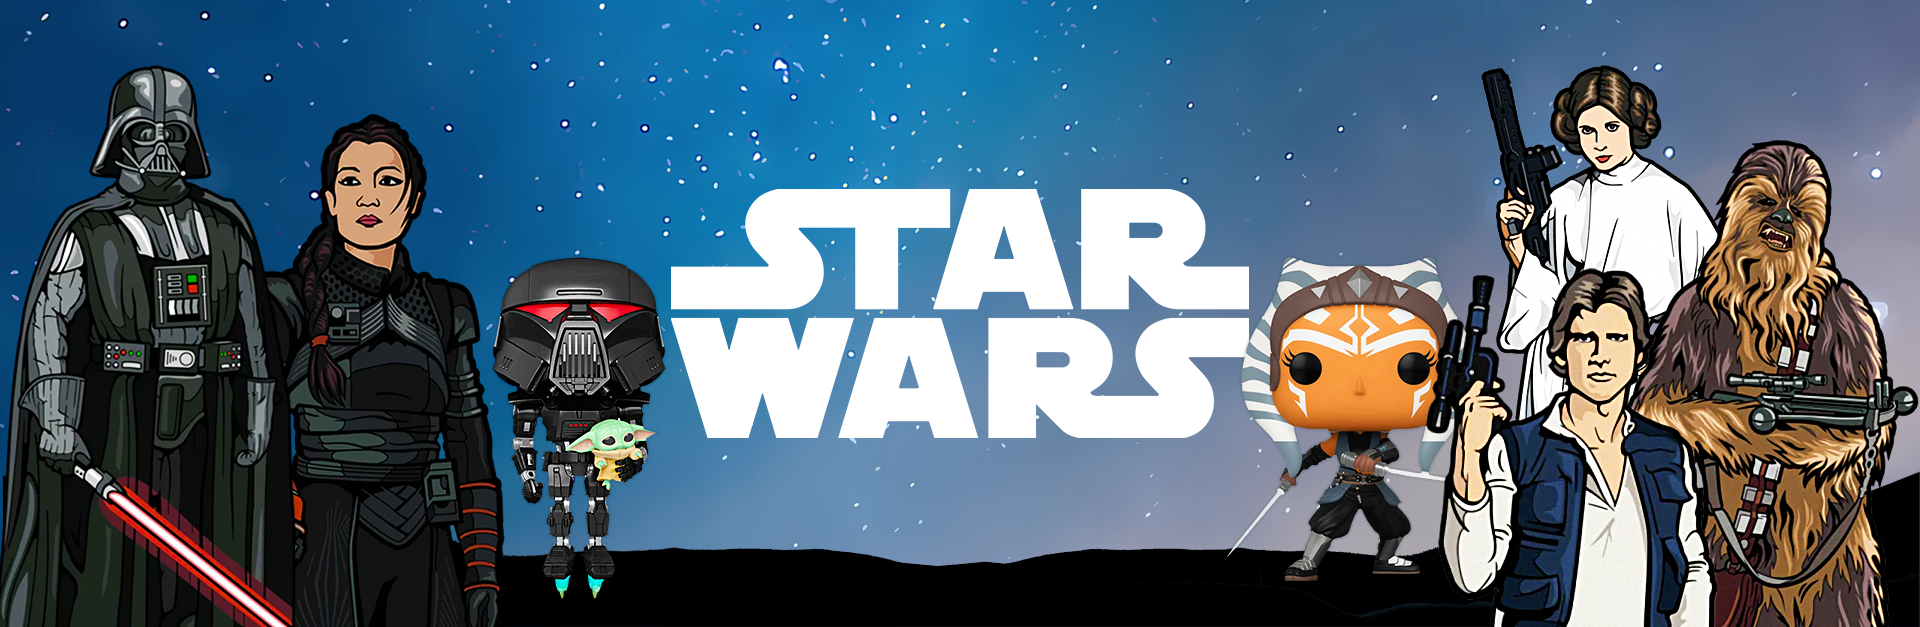 Shop Star Wars Funko POP, Action Figures, FiGPiNs, Toys and Collectibles